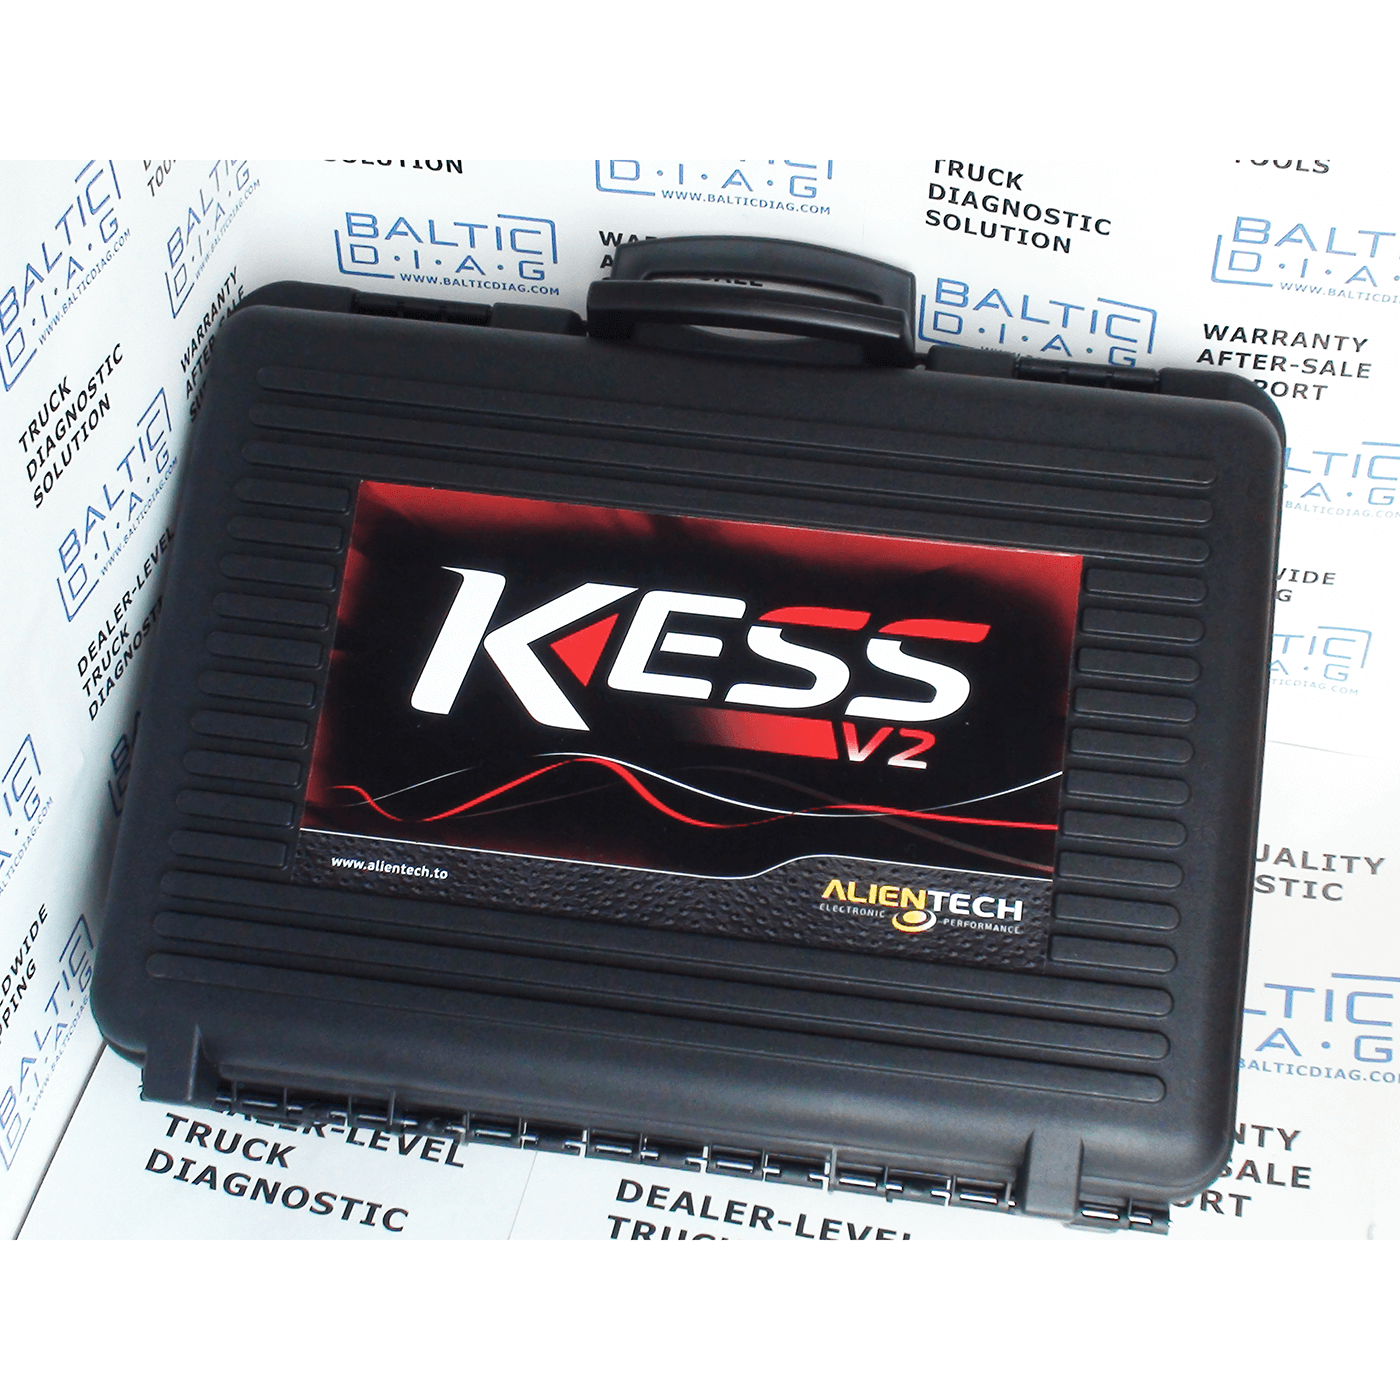 https://www.balticdiag.com/image/catalog/PRODUCTS/KESS-V2-ALIENTECH.png